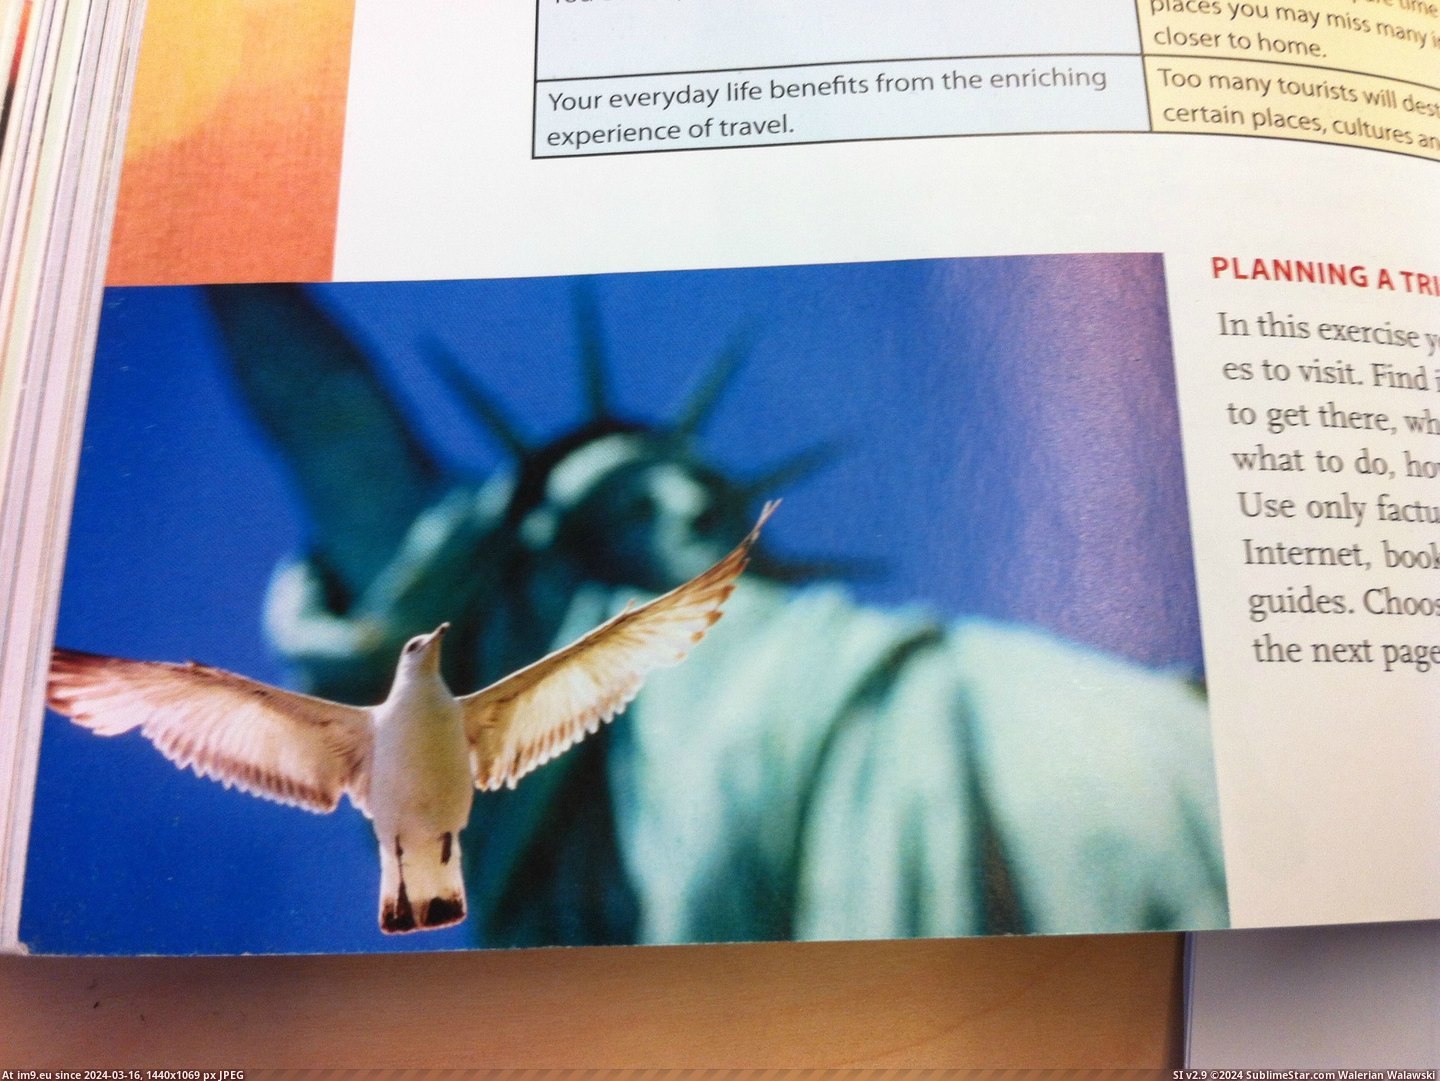 #Day #Dad #Happened #Textbook #Copyrighted #English #Photograph #Pissed [Pics] So I happened to come across my dad's copyrighted photograph in my English textbook the other day. He's pissed for sure.  Pic. (Bild von album My r/PICS favs))